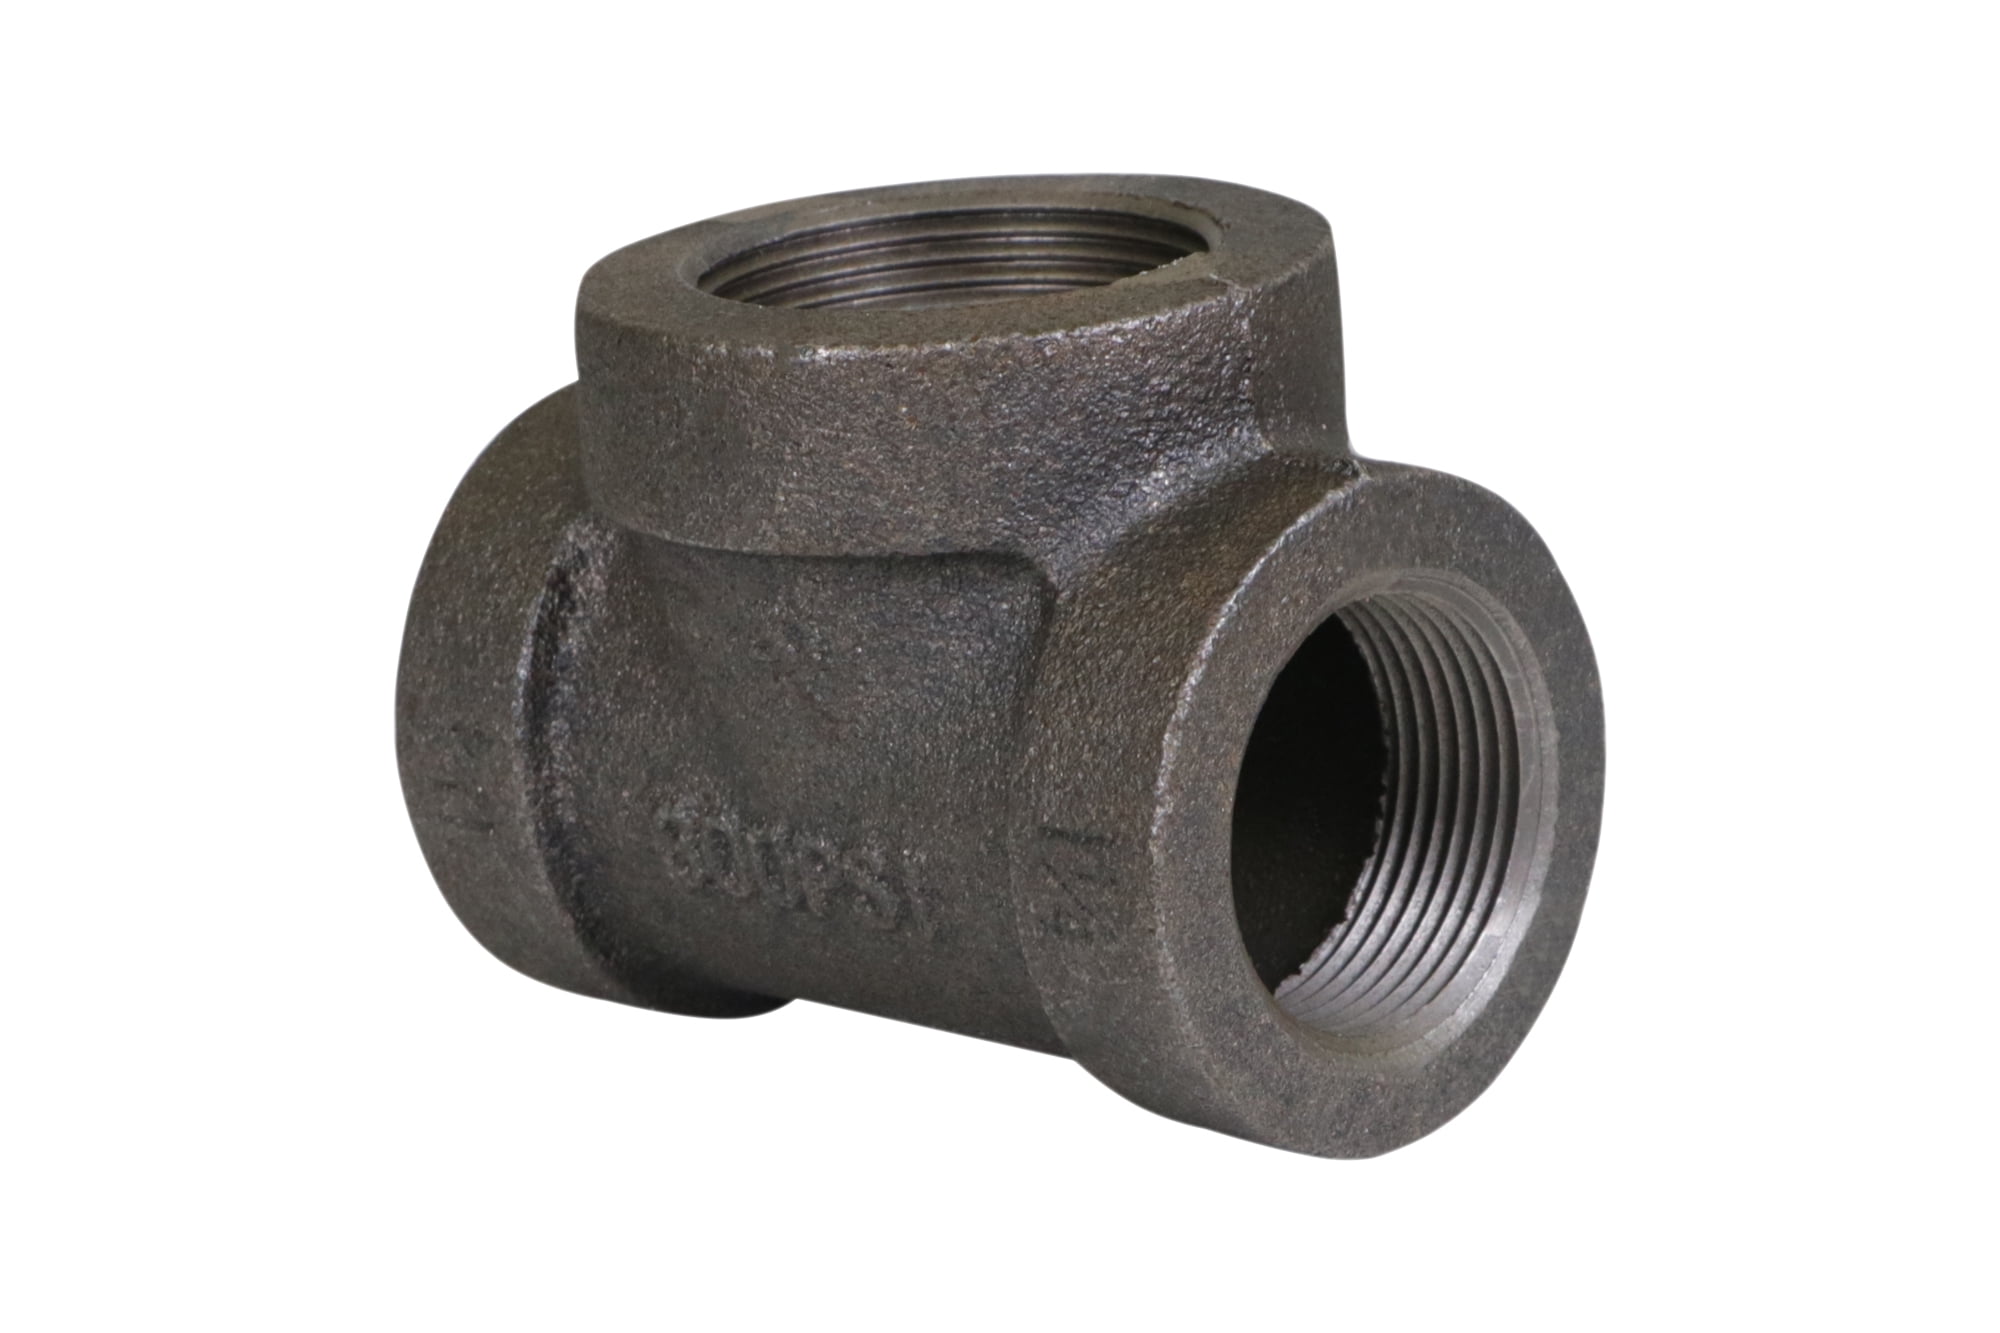 1-1/4" x 1-1/4" x 3/4" Inch Black Malleable Reducing Pipe Threaded Tee Fitting 